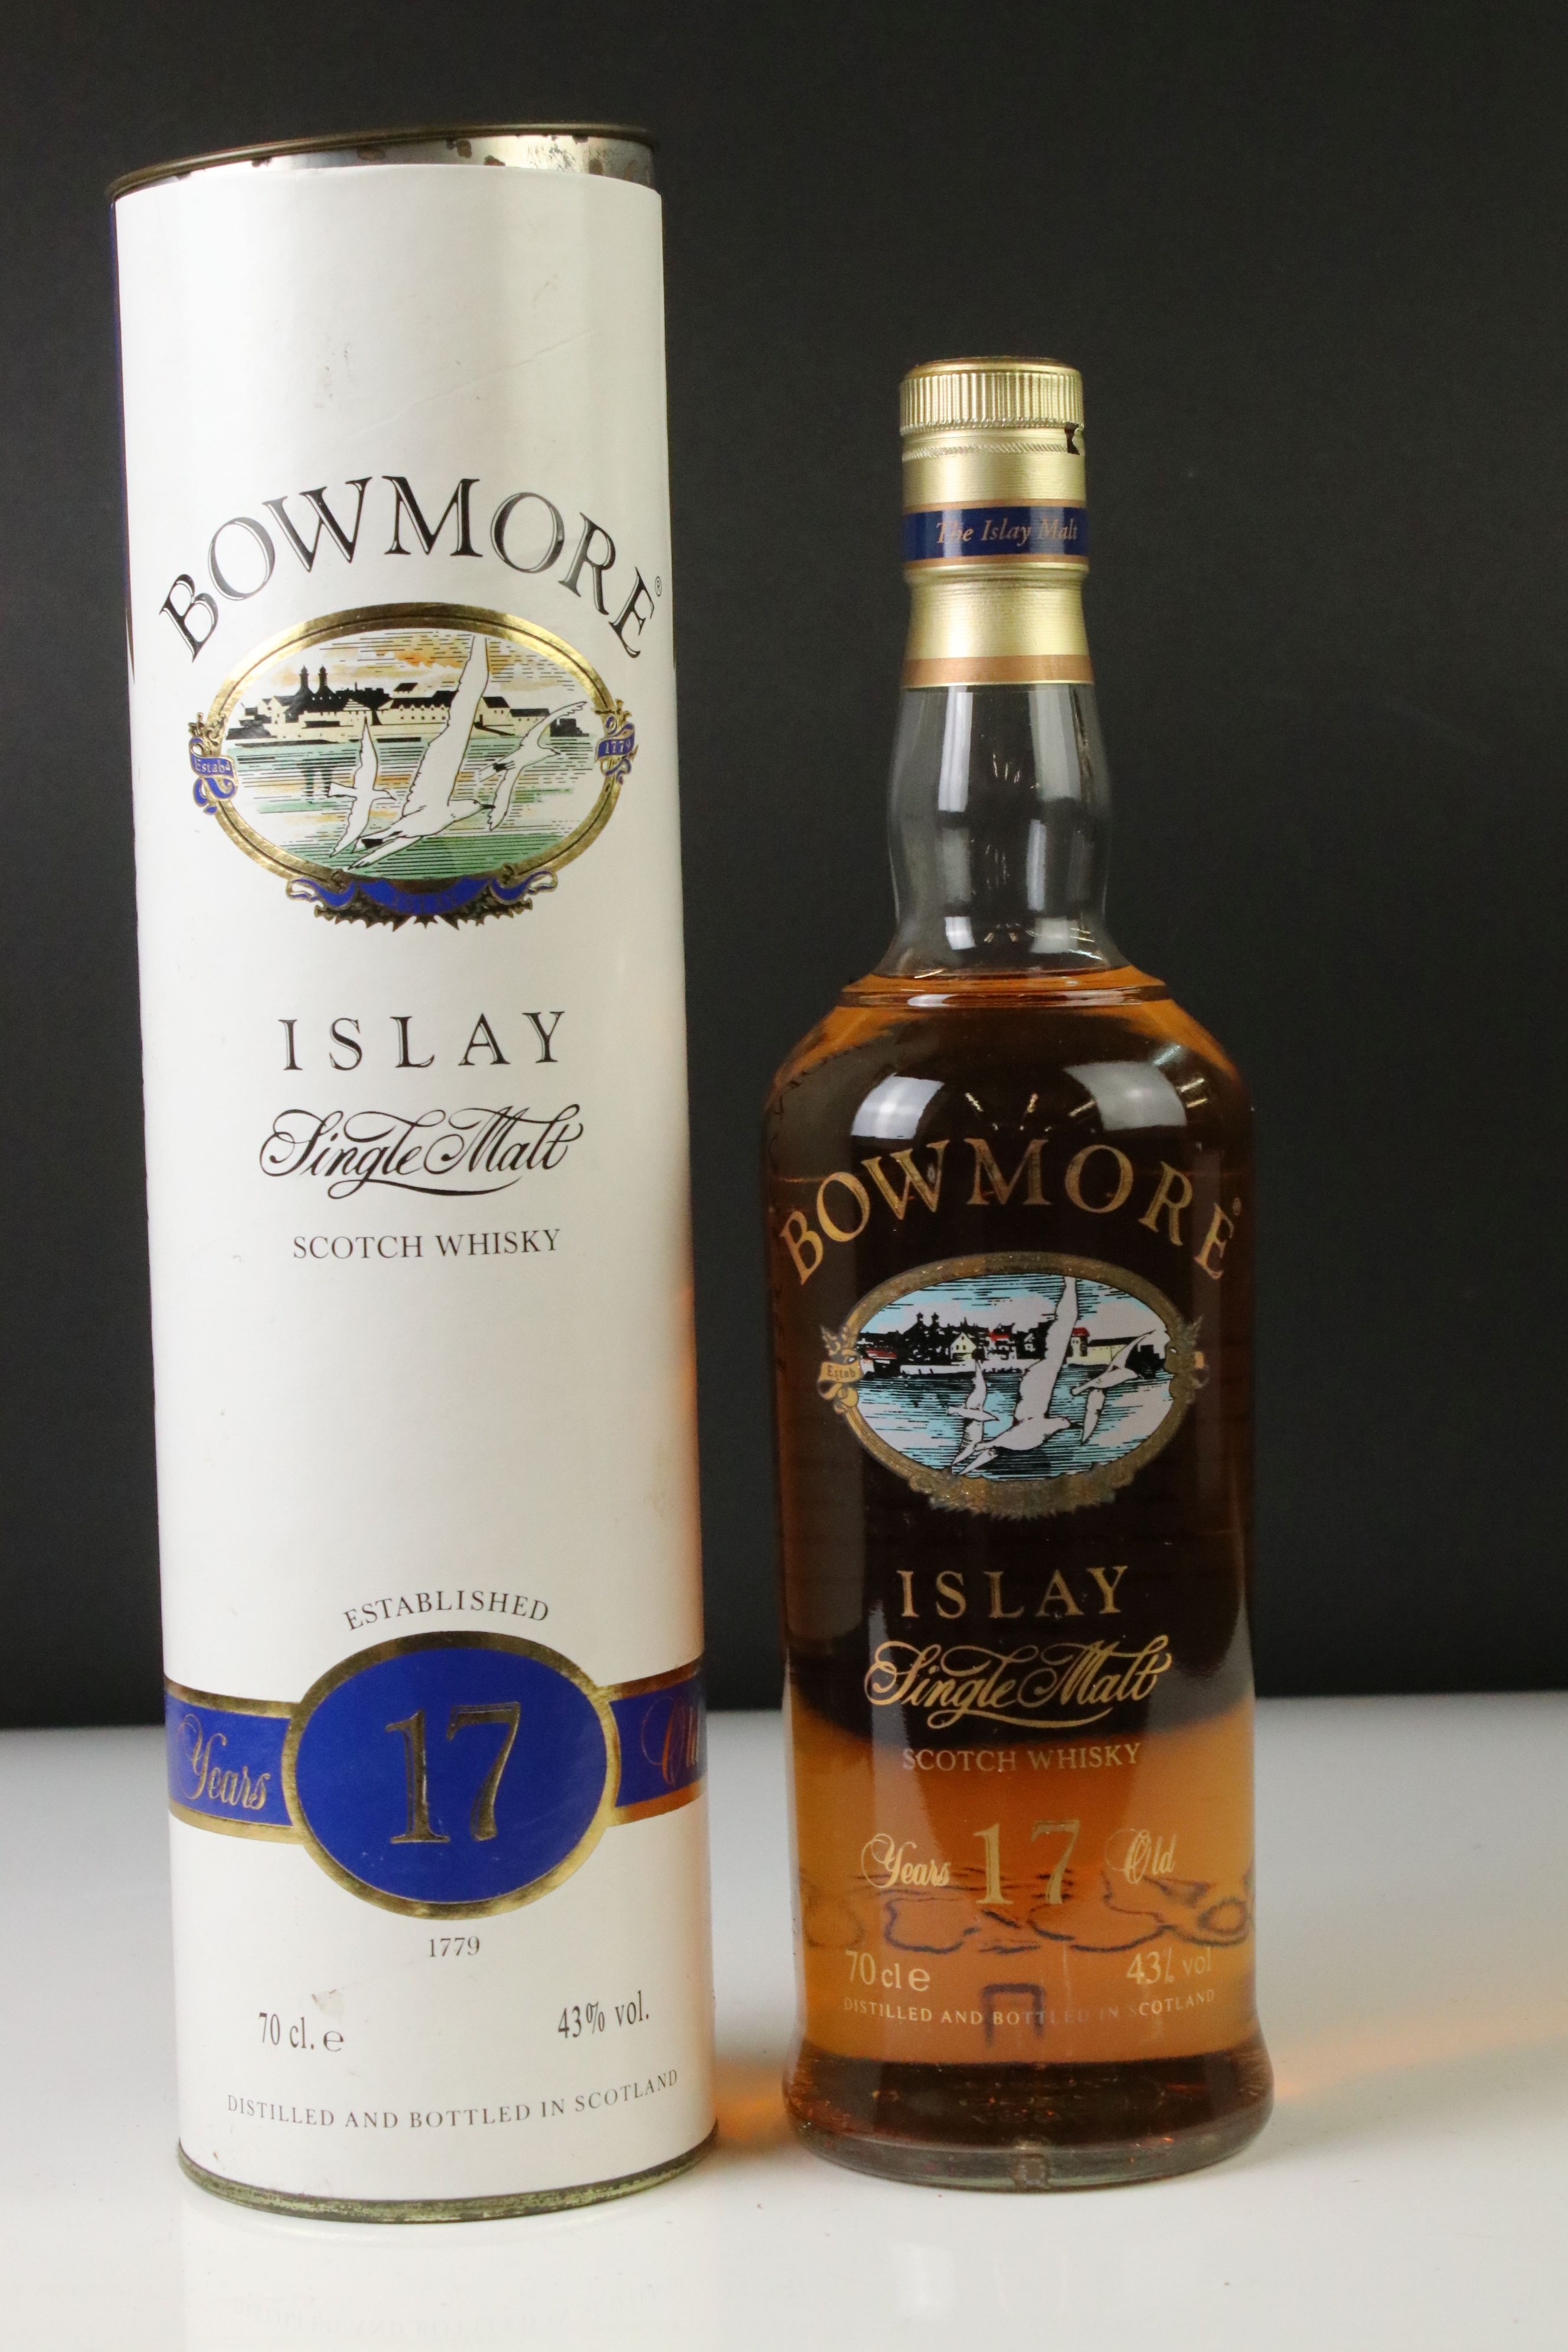 Whisky - 70cl Bottle of Bowmore Islay Single Malt 17 years old in box